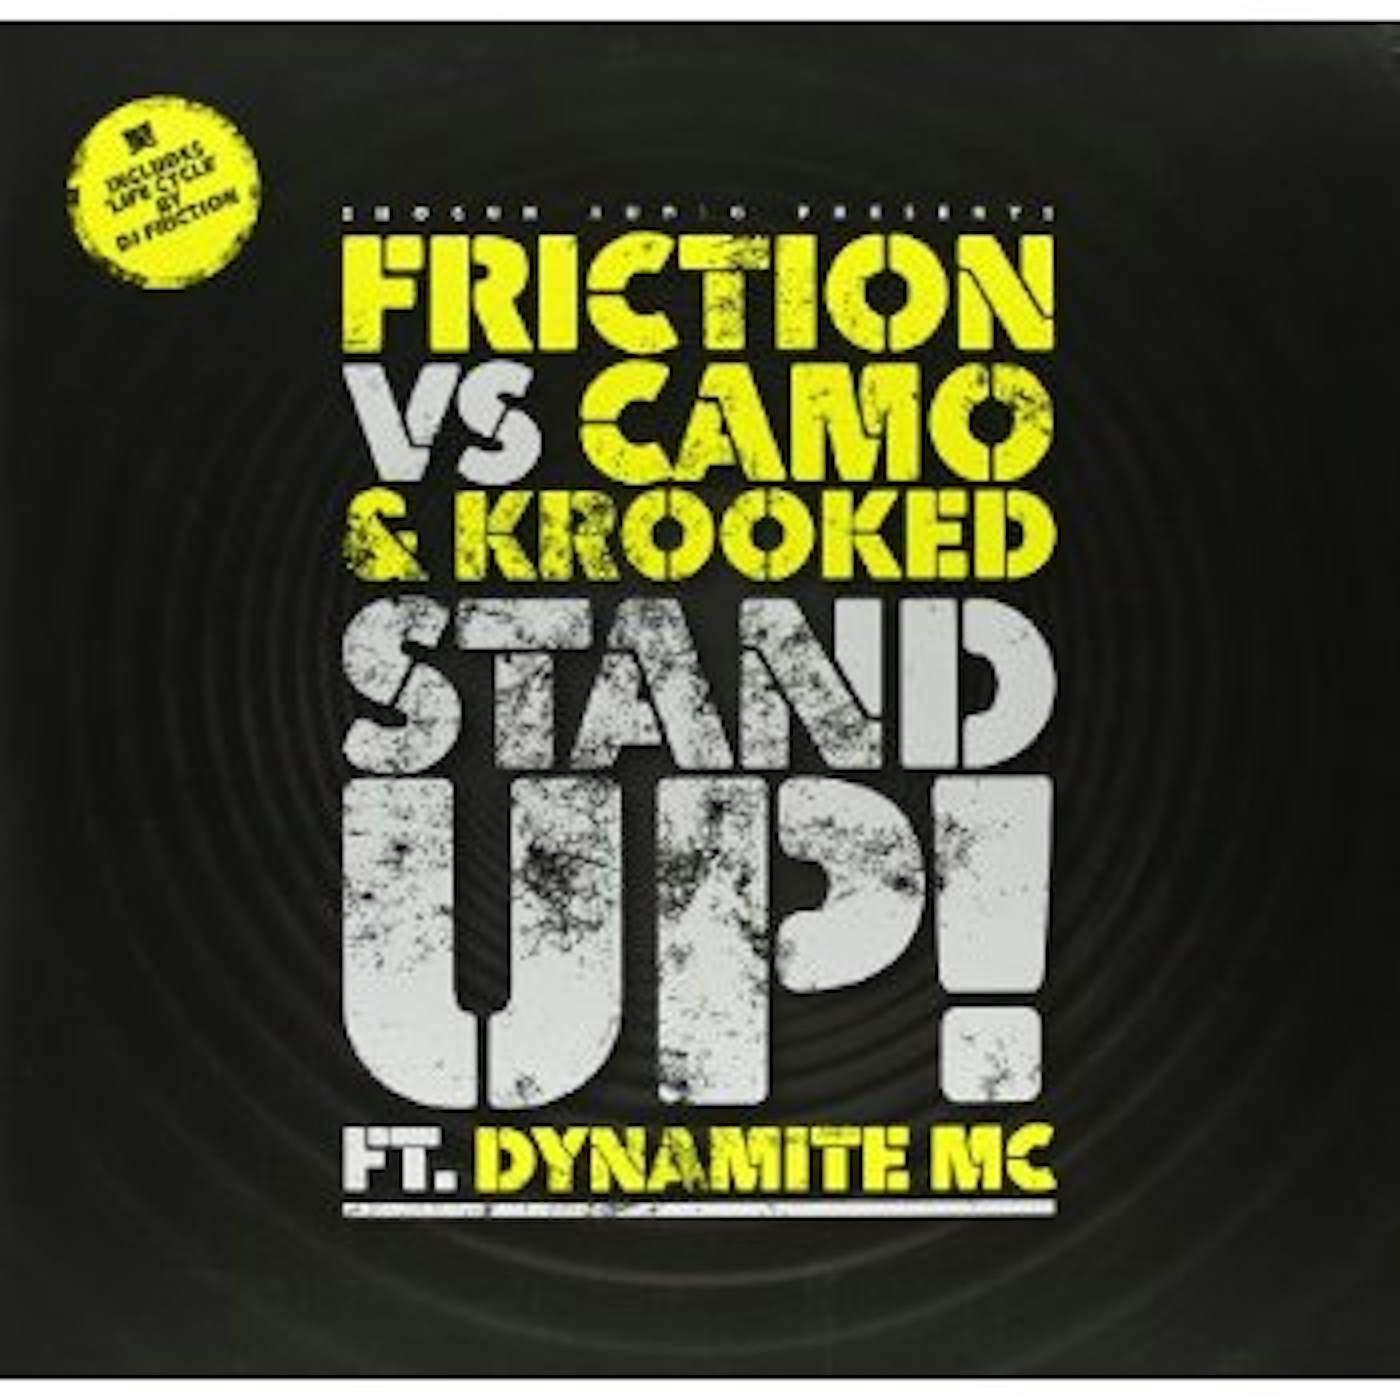 Friction STAND UP (VS CAMO & KROOKED FT DYNAMITE)/LIFE Vinyl Record